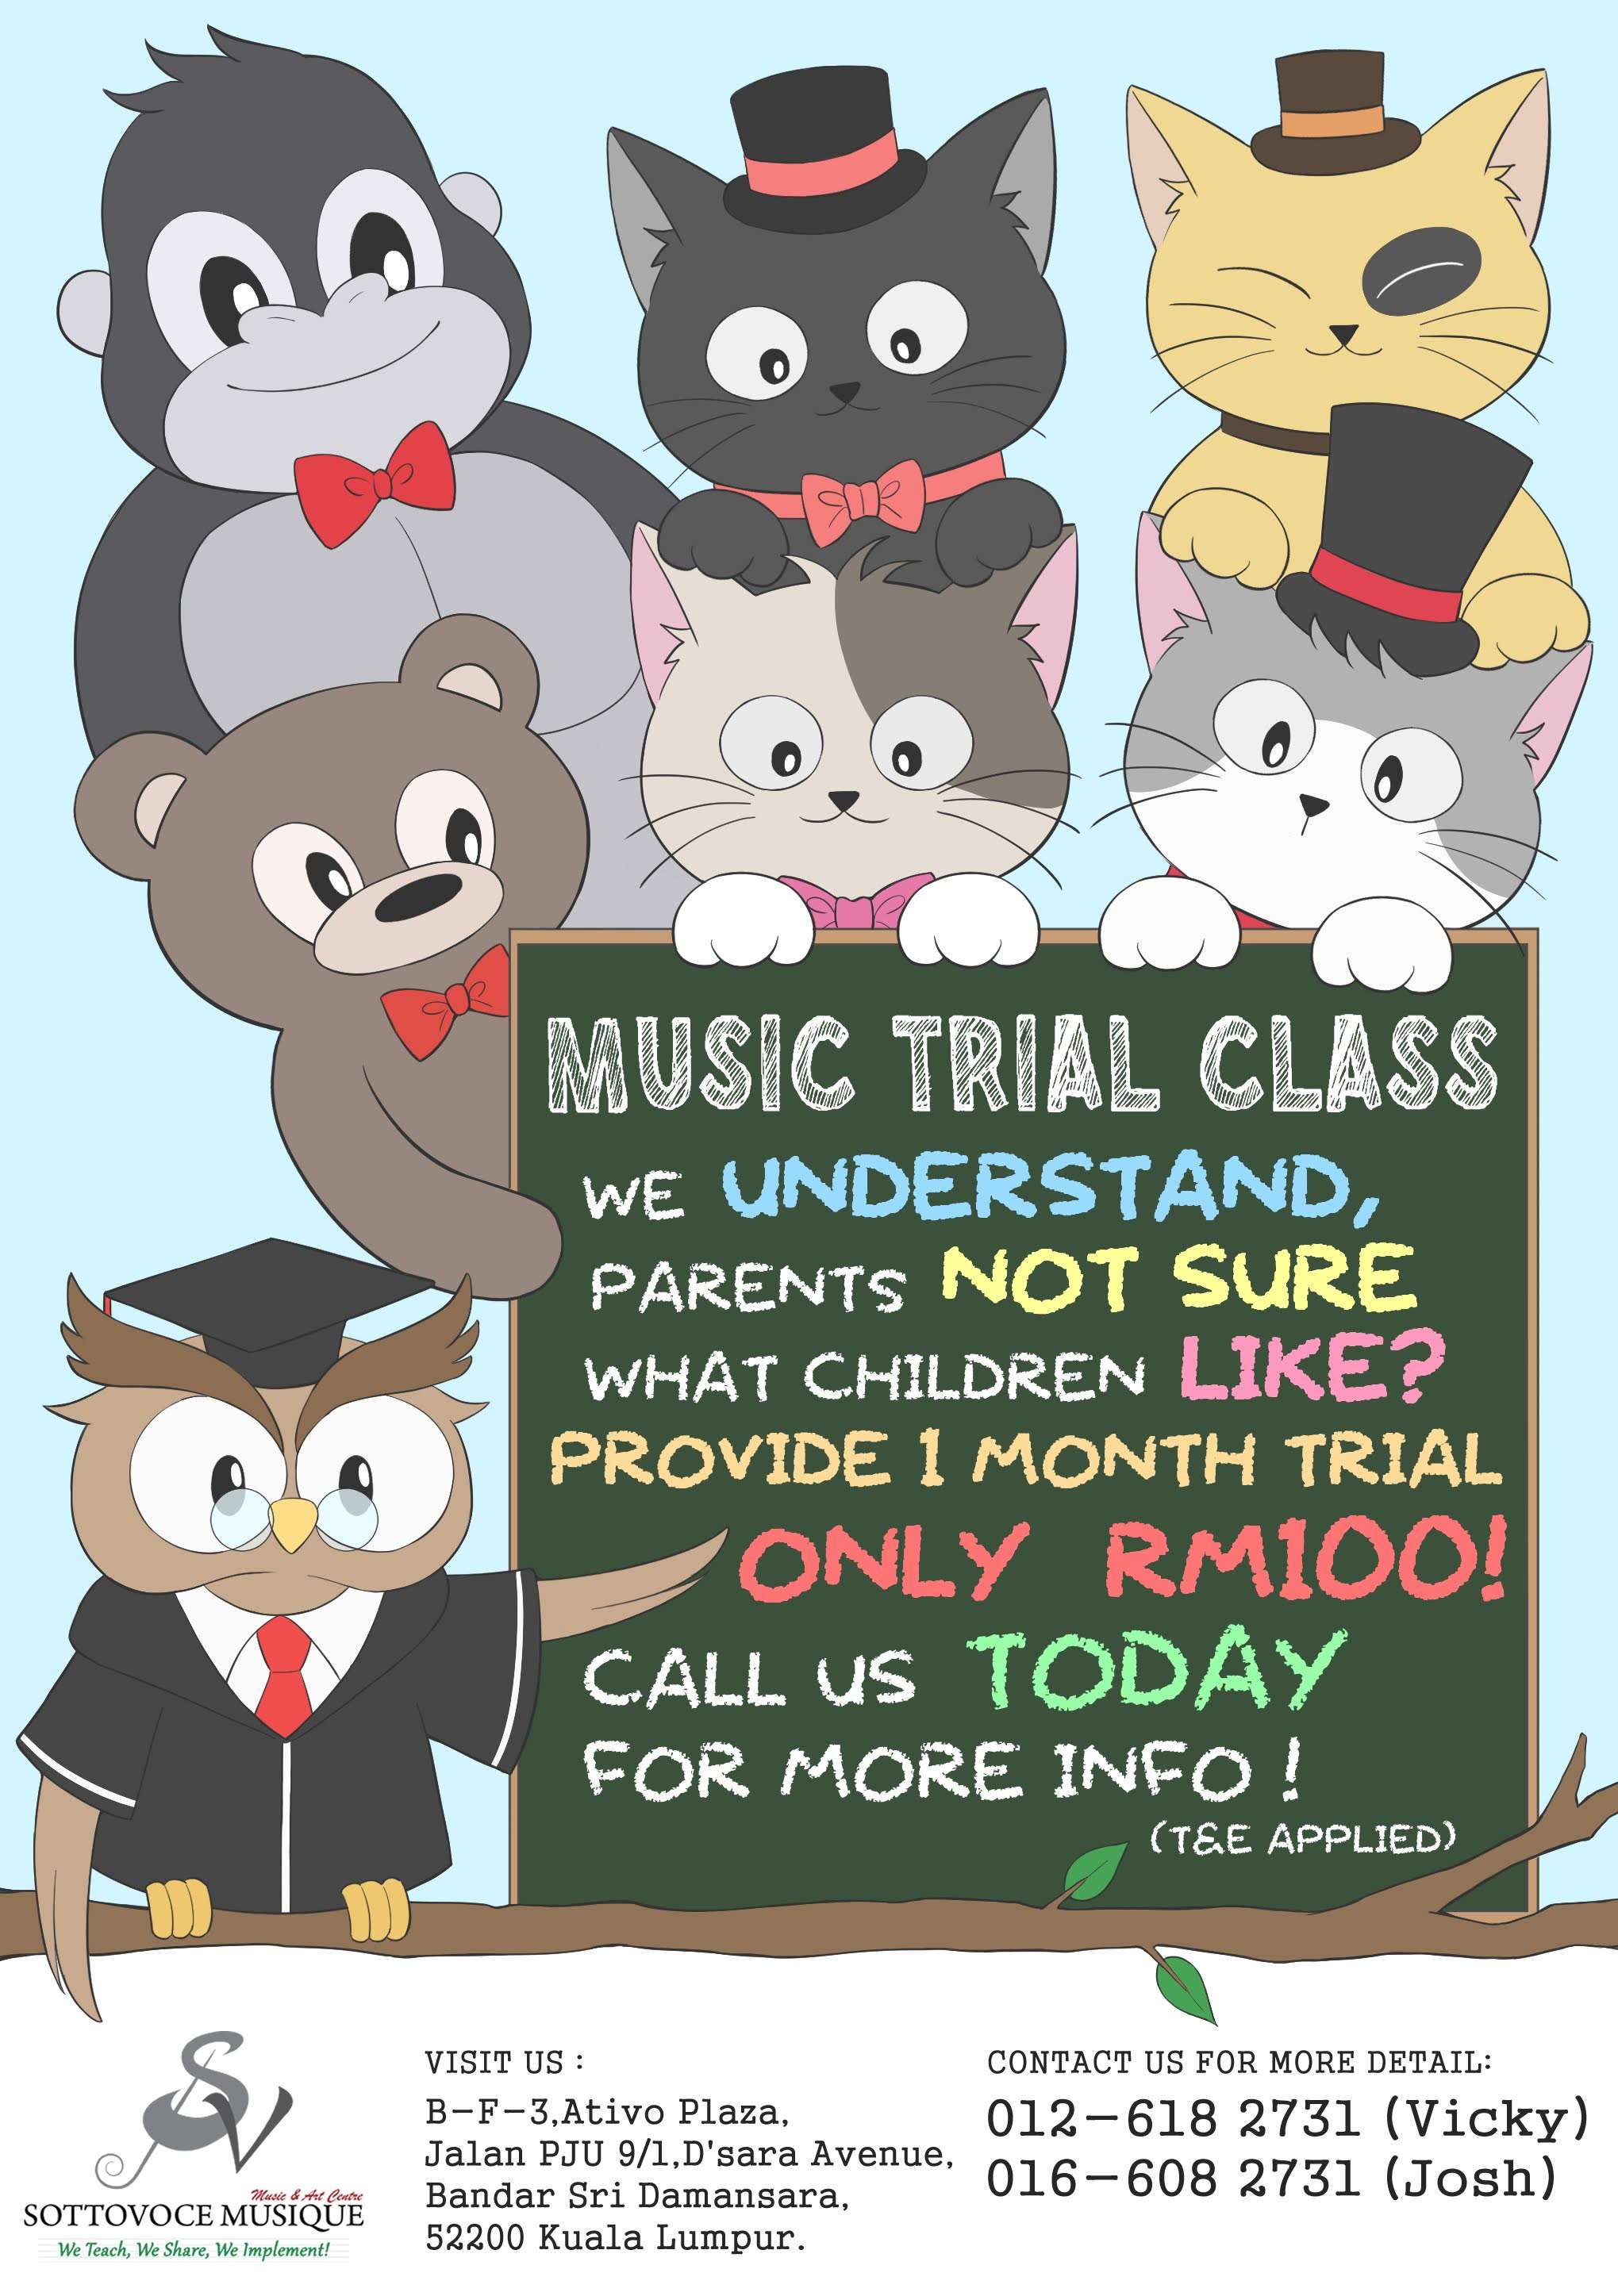 Music Trial Class For 1 Month